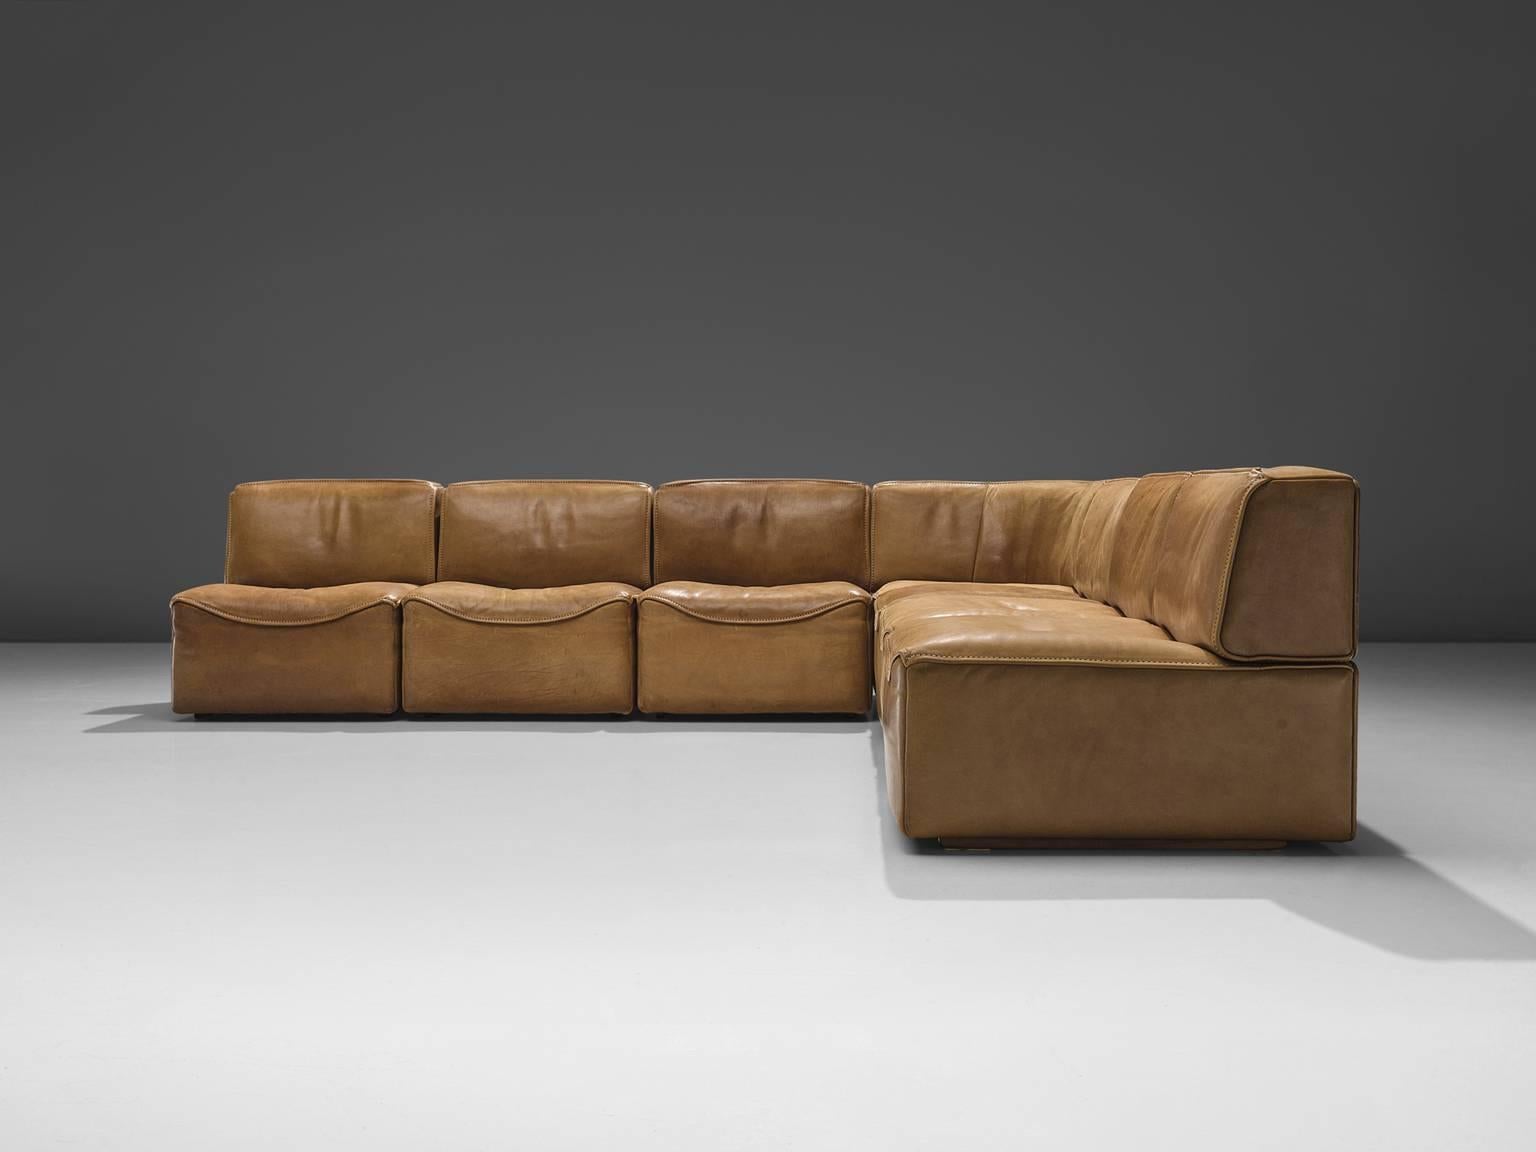 De Sede, sectional sofa model DS-15, seven elements, cognac leather, Switzerland, 1970s. 

This sectional sofa contains one corner element and six normal elements. The separate elements make it possible to arrange this sofa to your own wishes. The